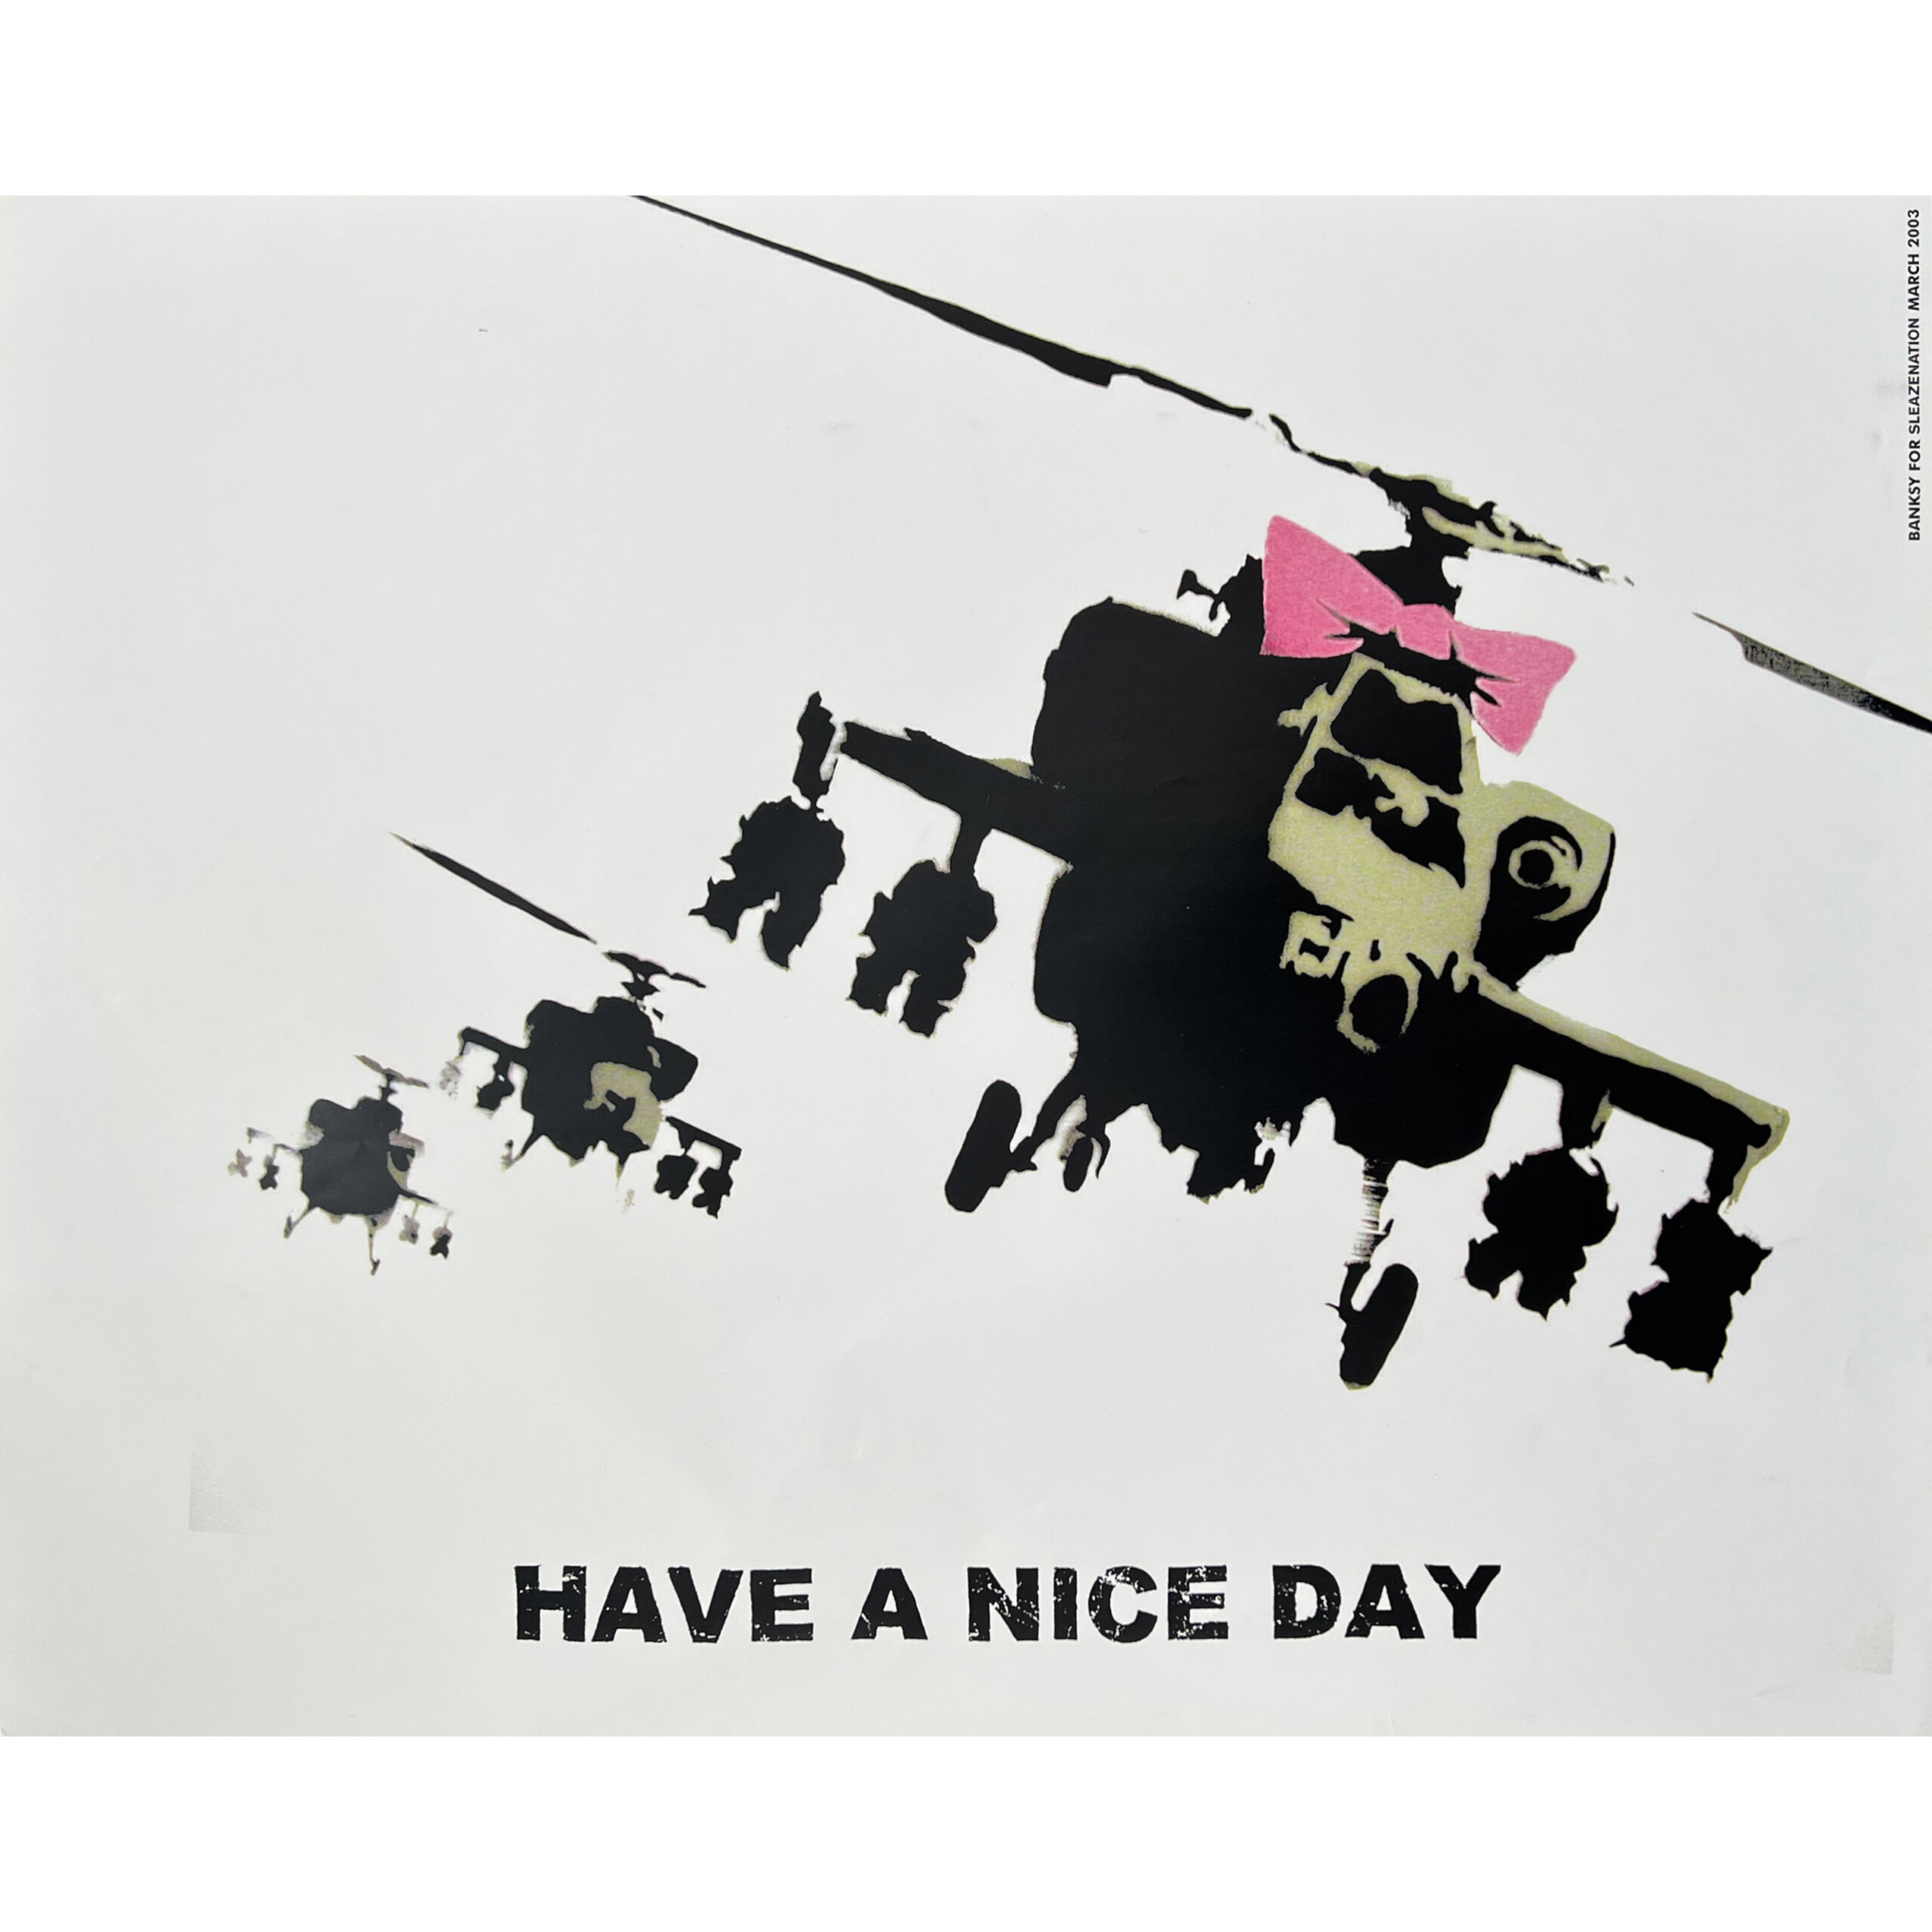 Banksy - Have a Nice Day (Happy Choppers) Sleazenation Poster 